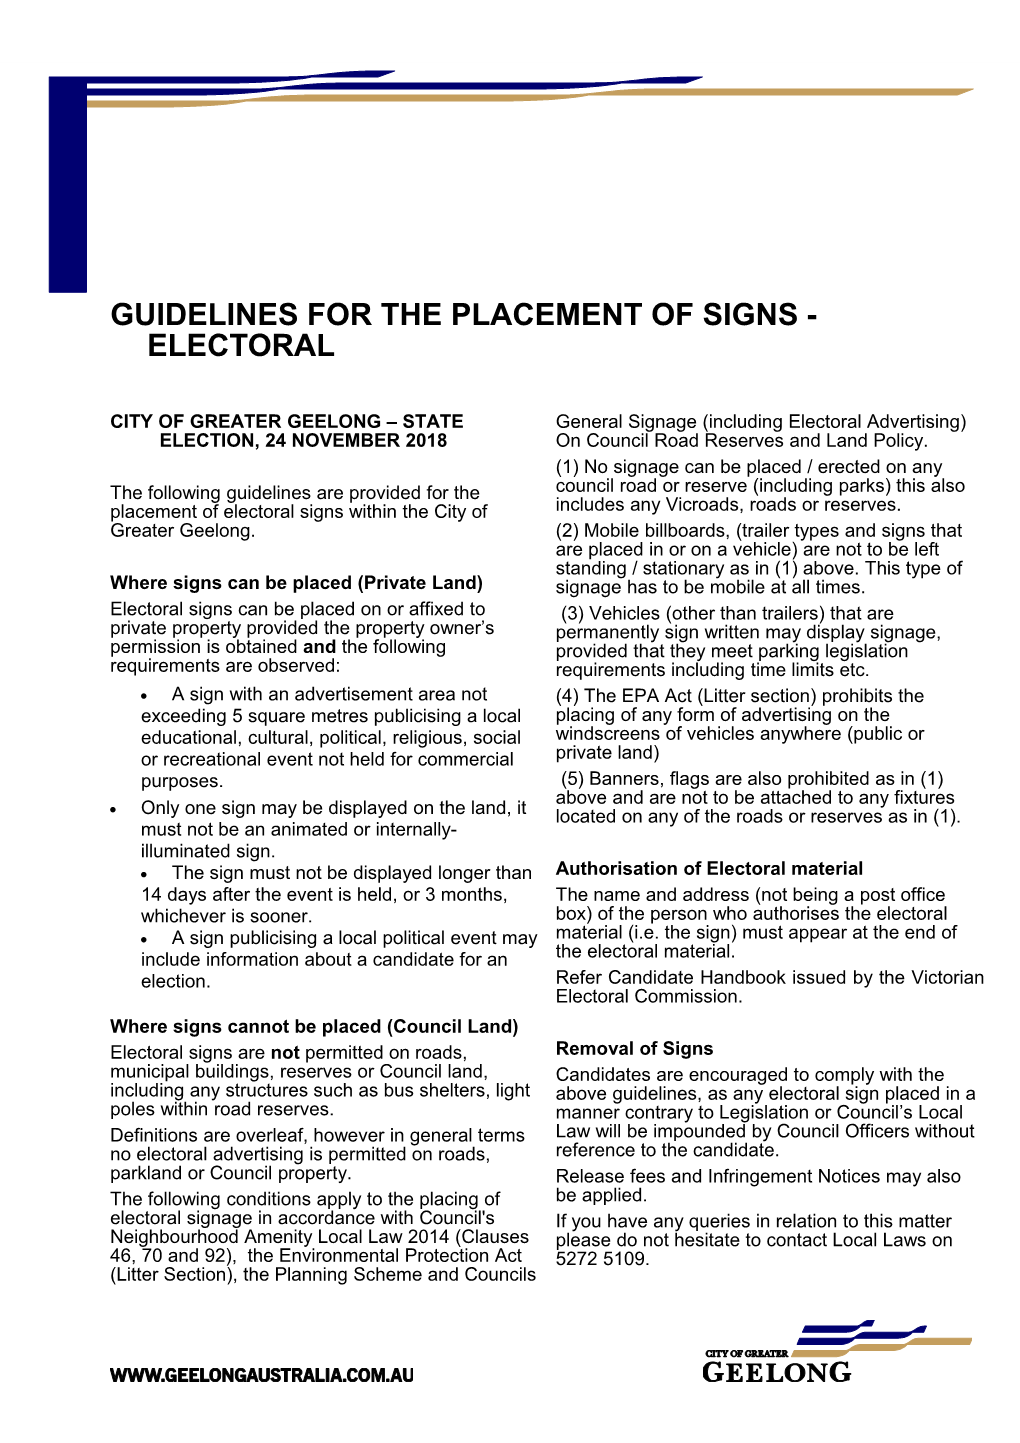 Guidelines for the Placement of Signs - Electoral